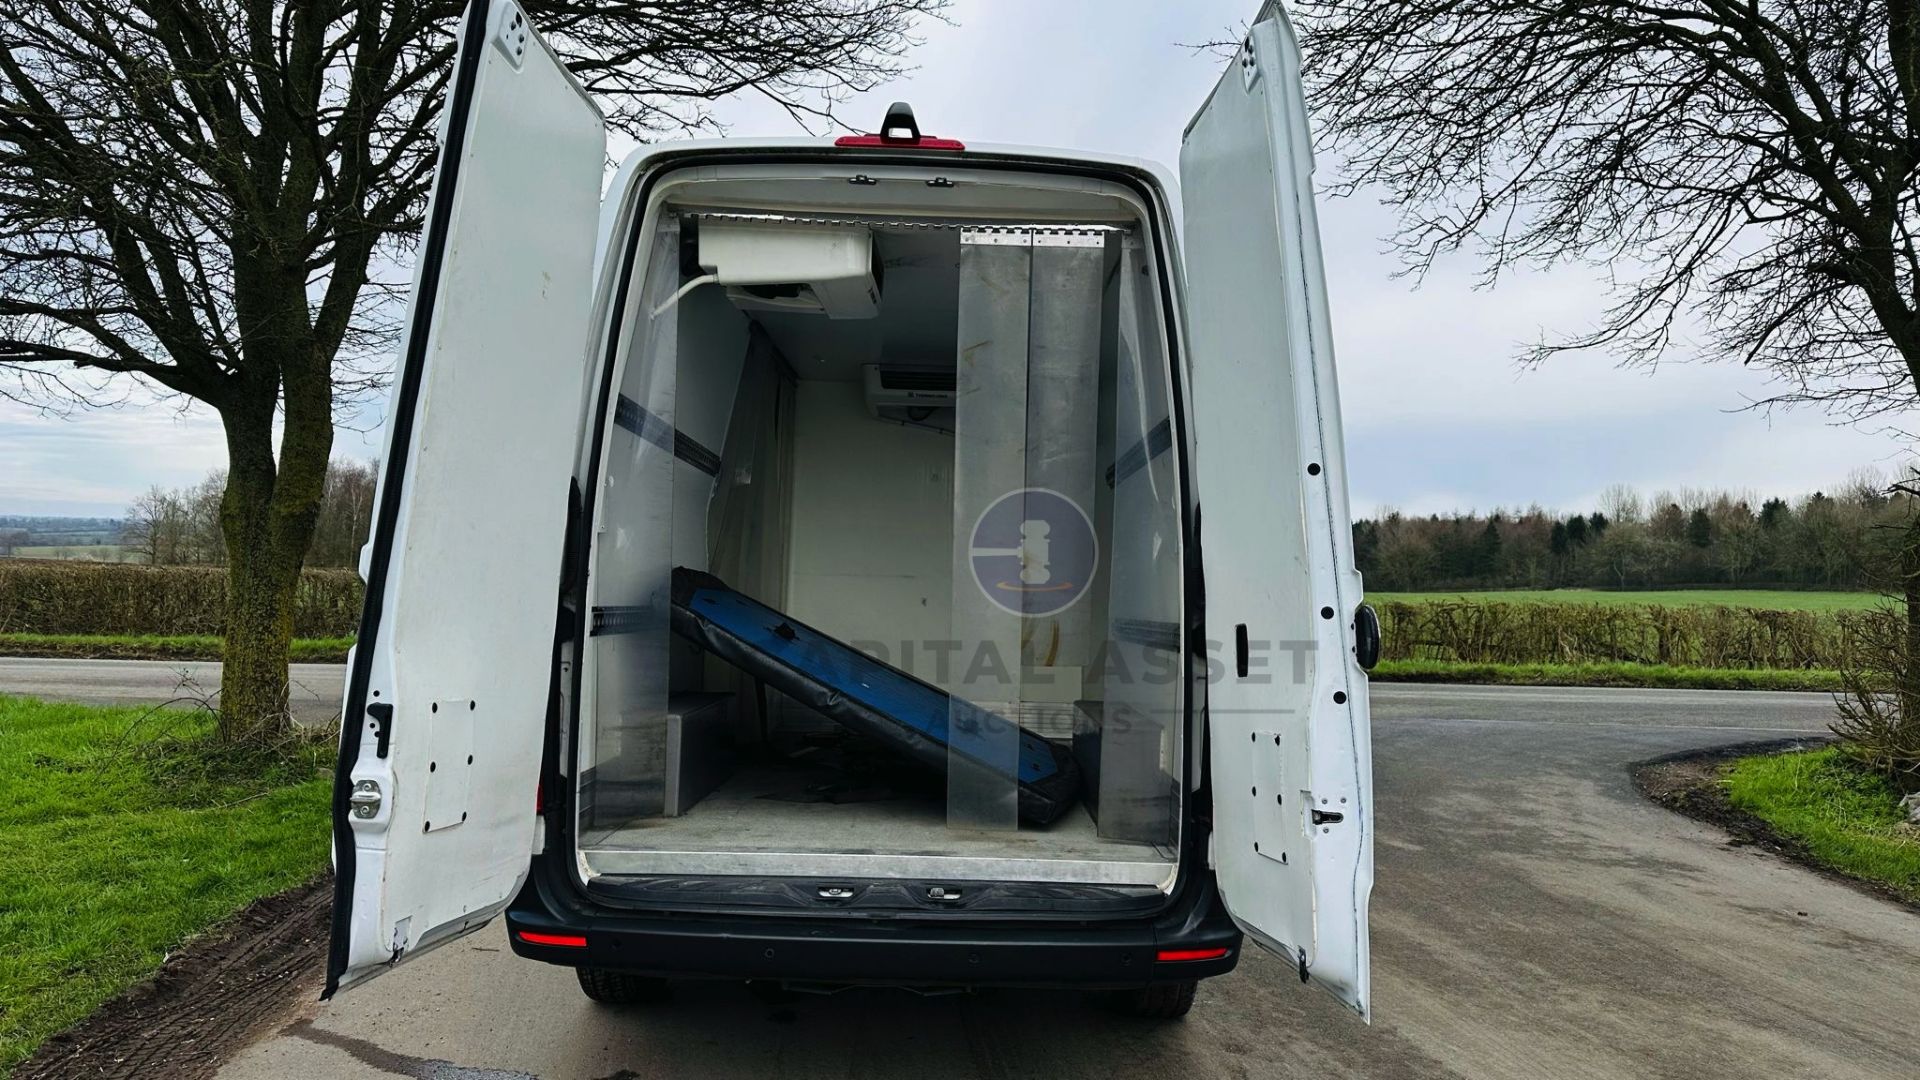 MERCEDES-BENZ SPRINTER 314 CDI *MWB - REFRIGERATED VAN* (2019 - FACELIFT MODEL) *OVERNIGHT STANDBY* - Image 17 of 41